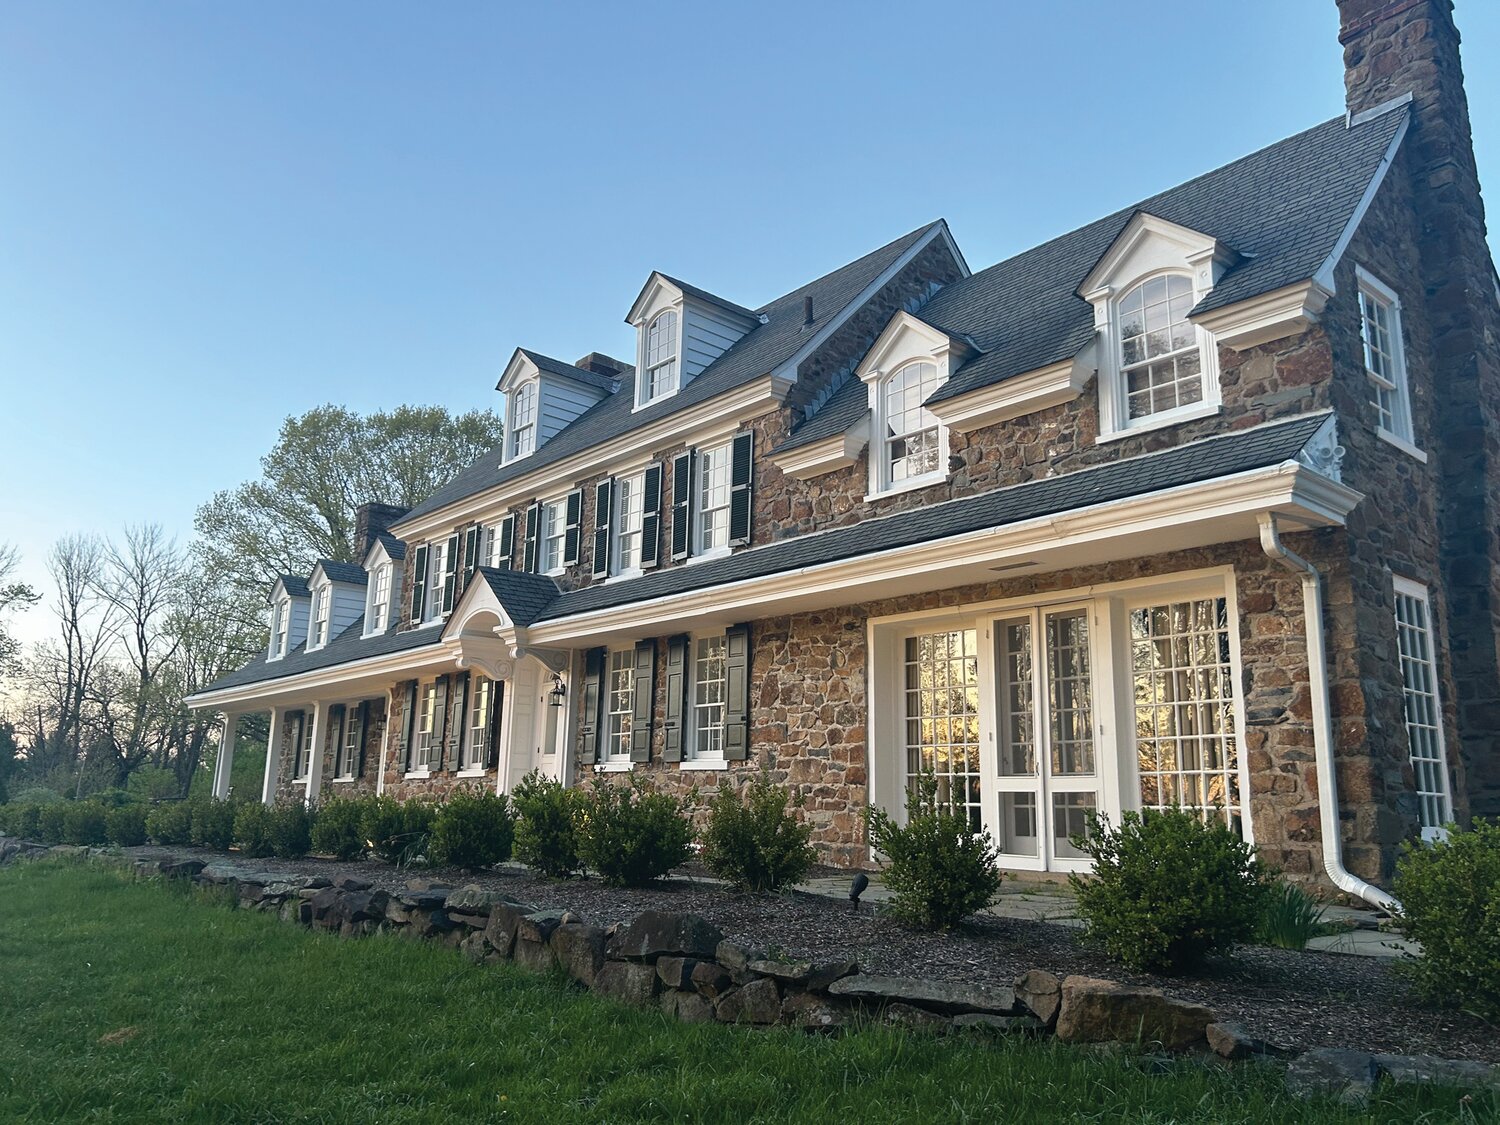 Chimney Hill Estate has been renovated and opened as a bed and breakfast inn.